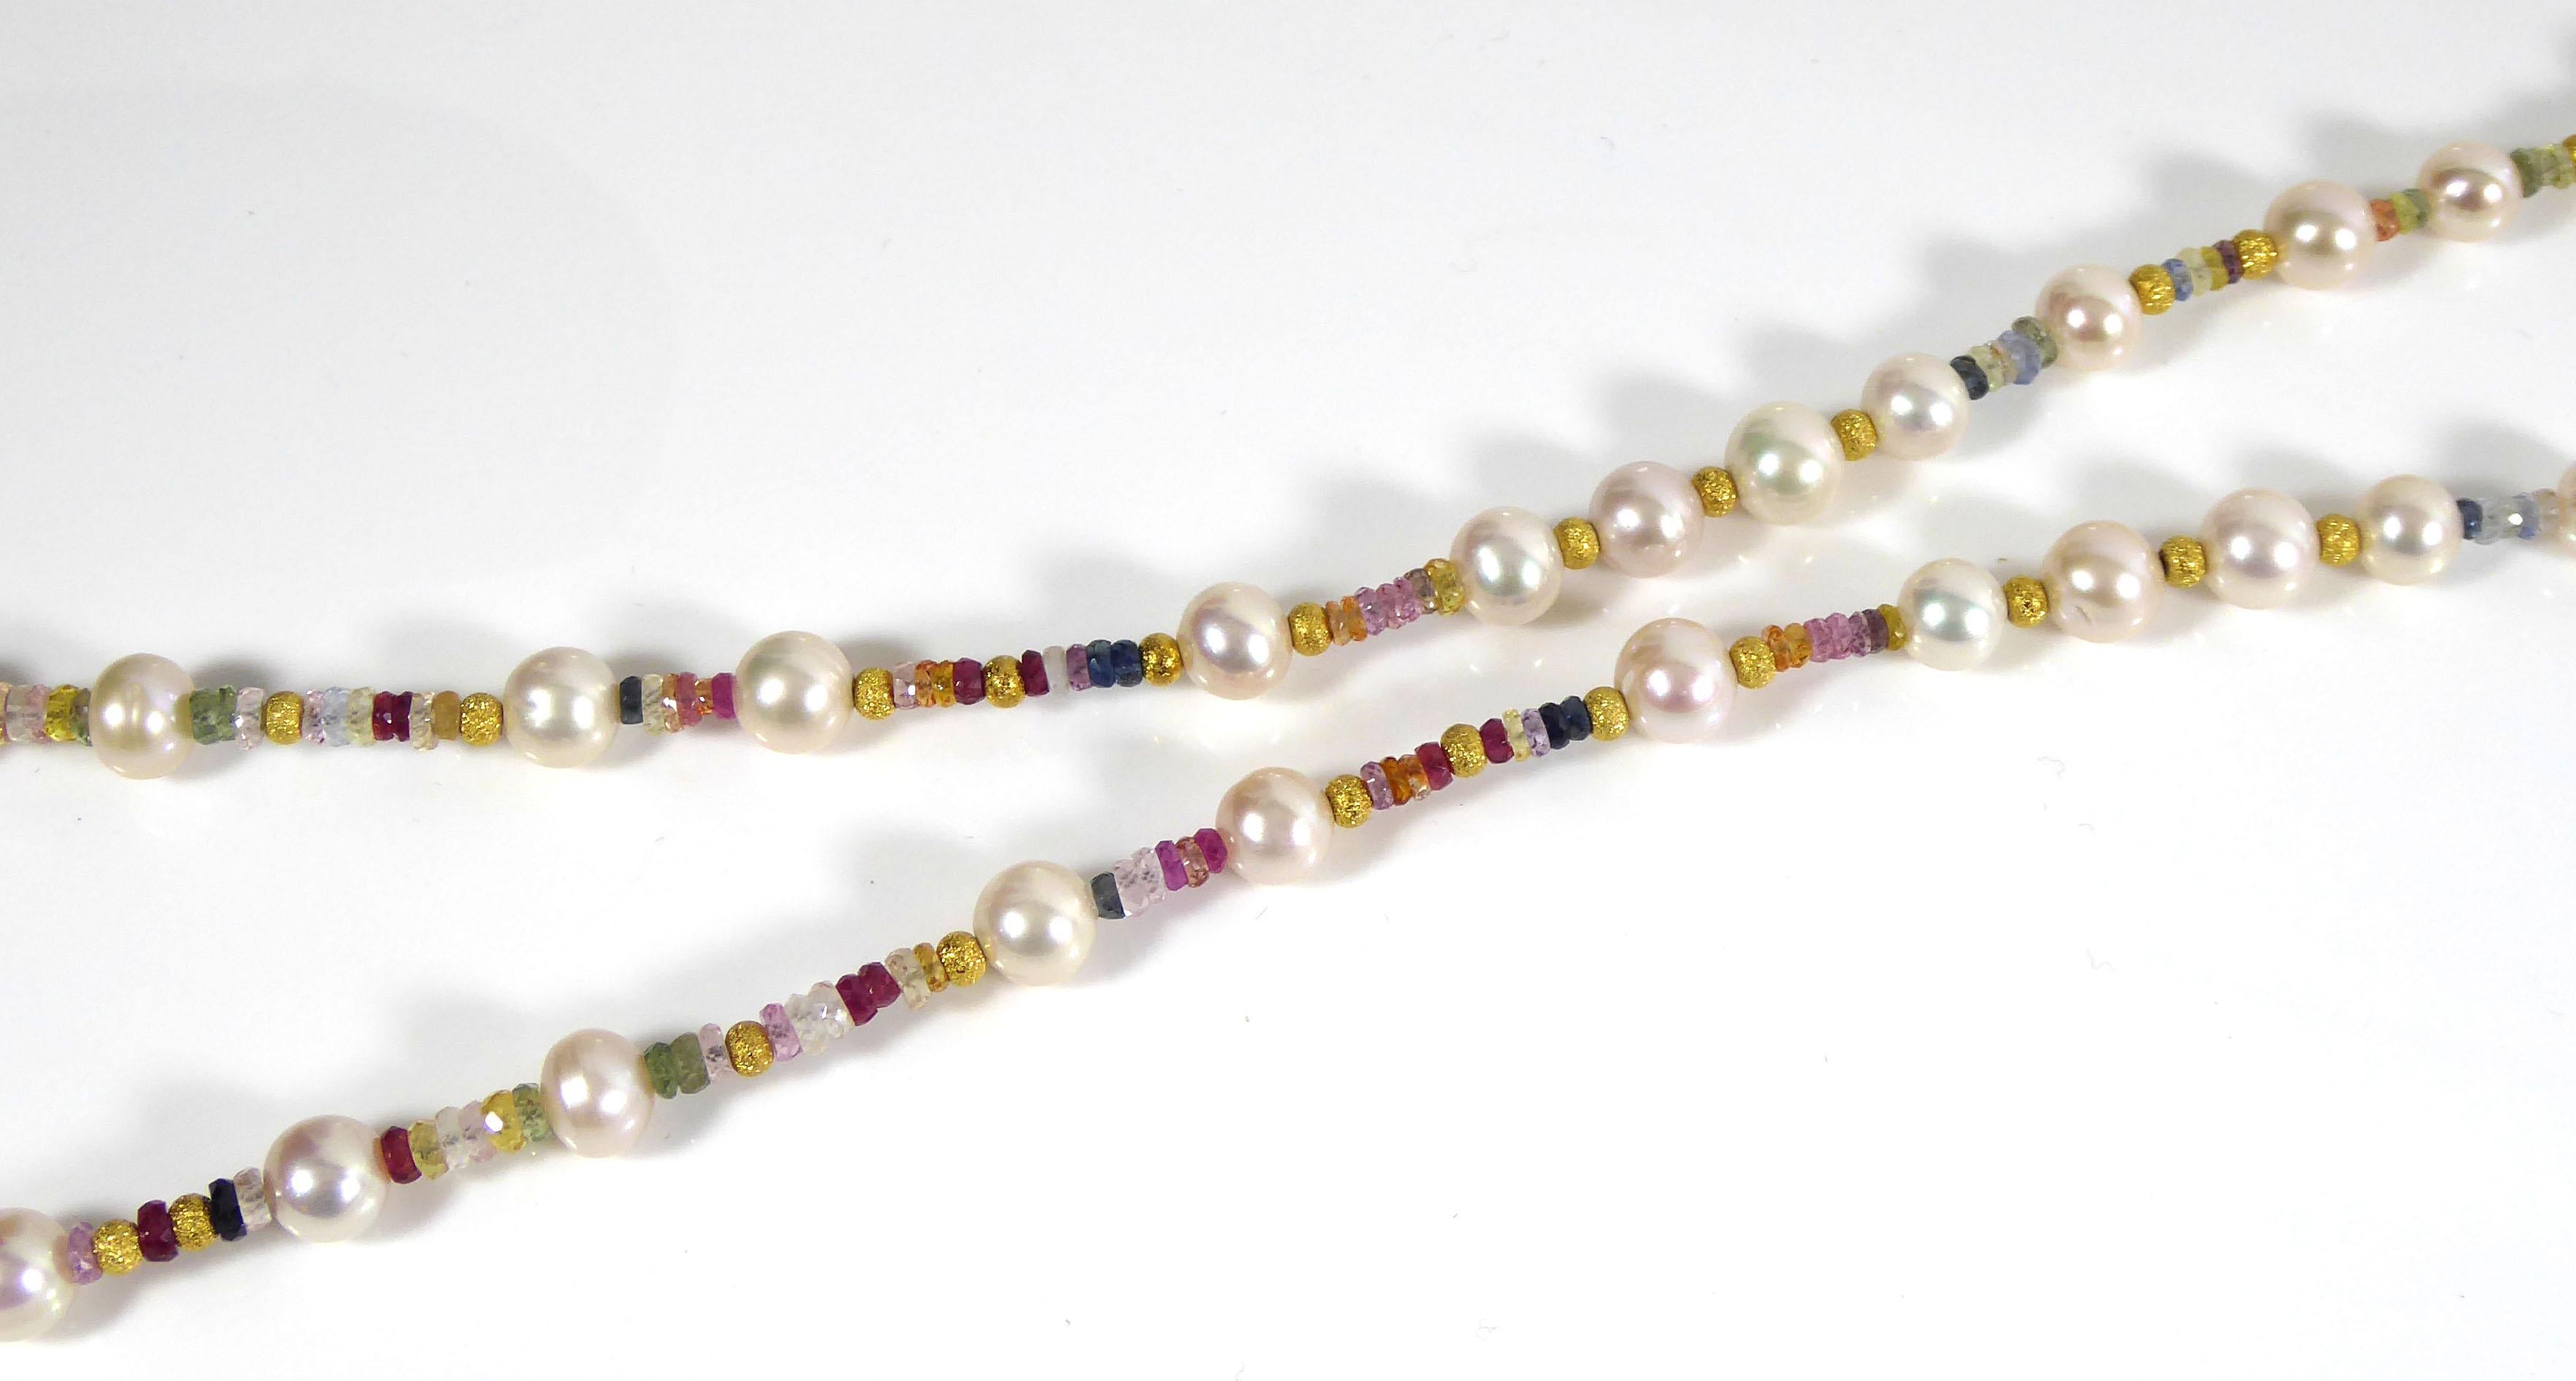 Cultured pearls set with multi-coloured sapphire beads on silver wire, with silver gilt beads and clasp.
Stamped '925' (for sterling silver gilt) on tongue of clasp.
28ins/71cm